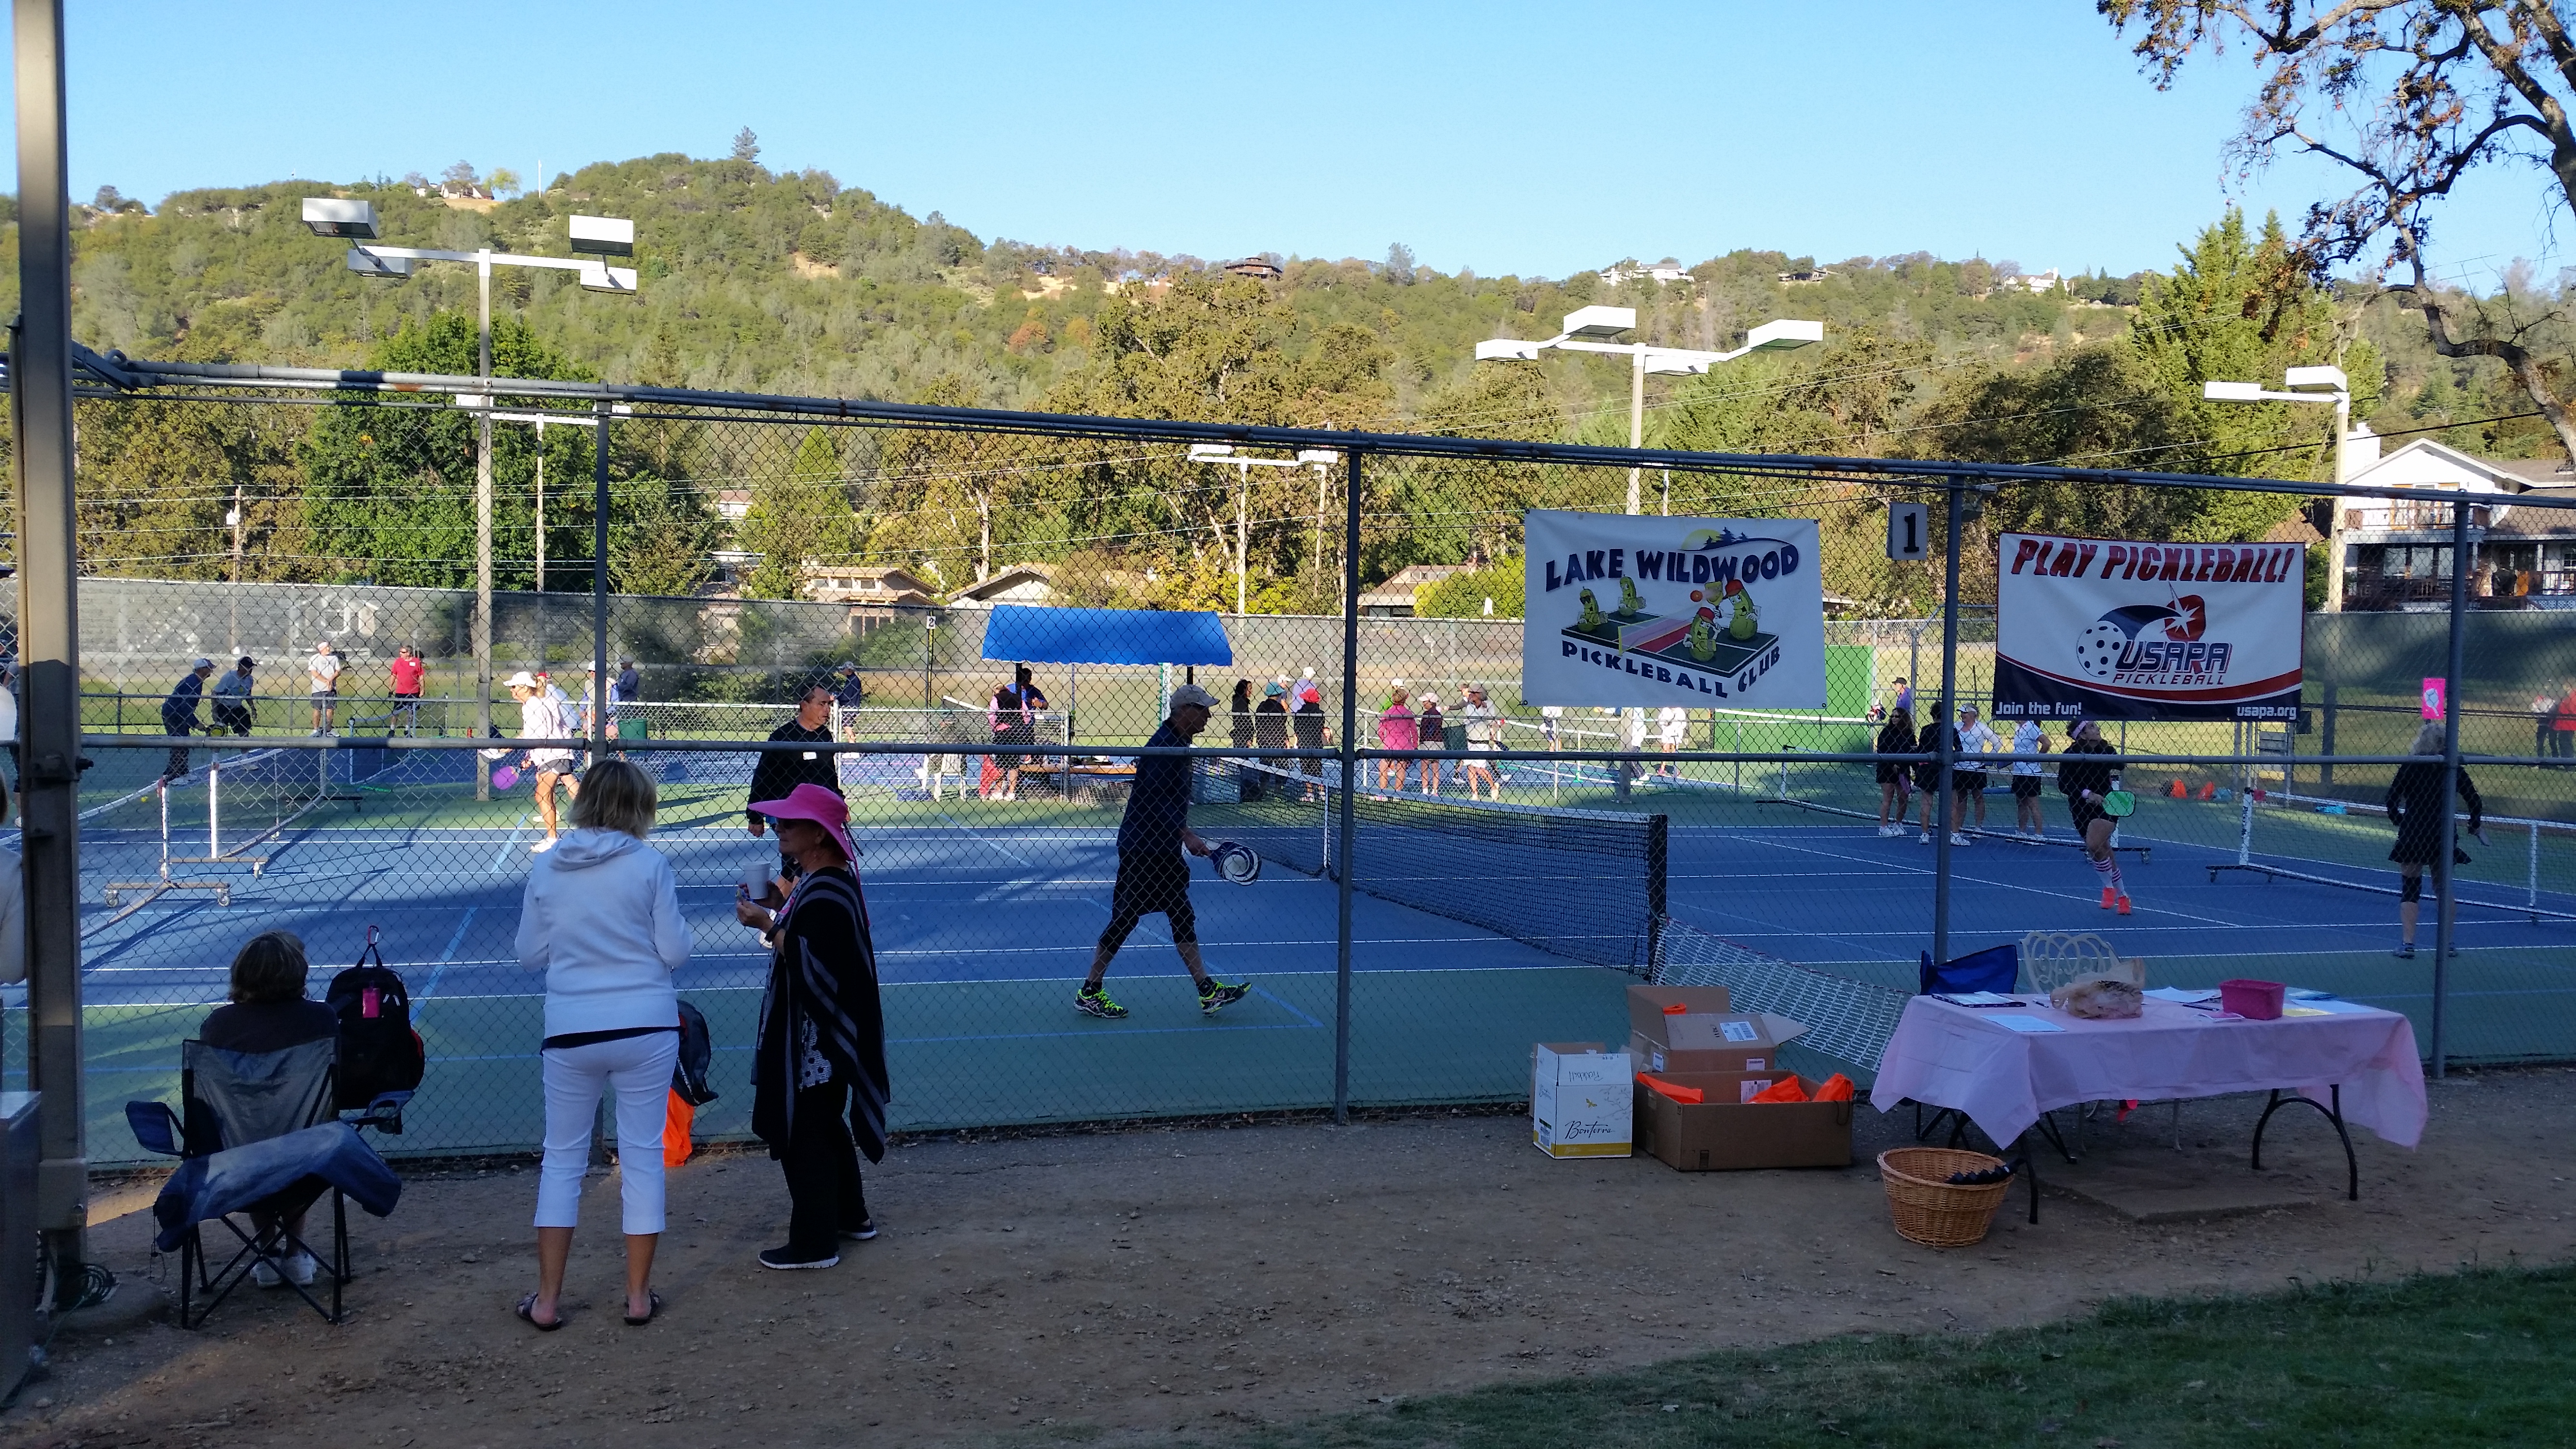 Tournament action on the courts